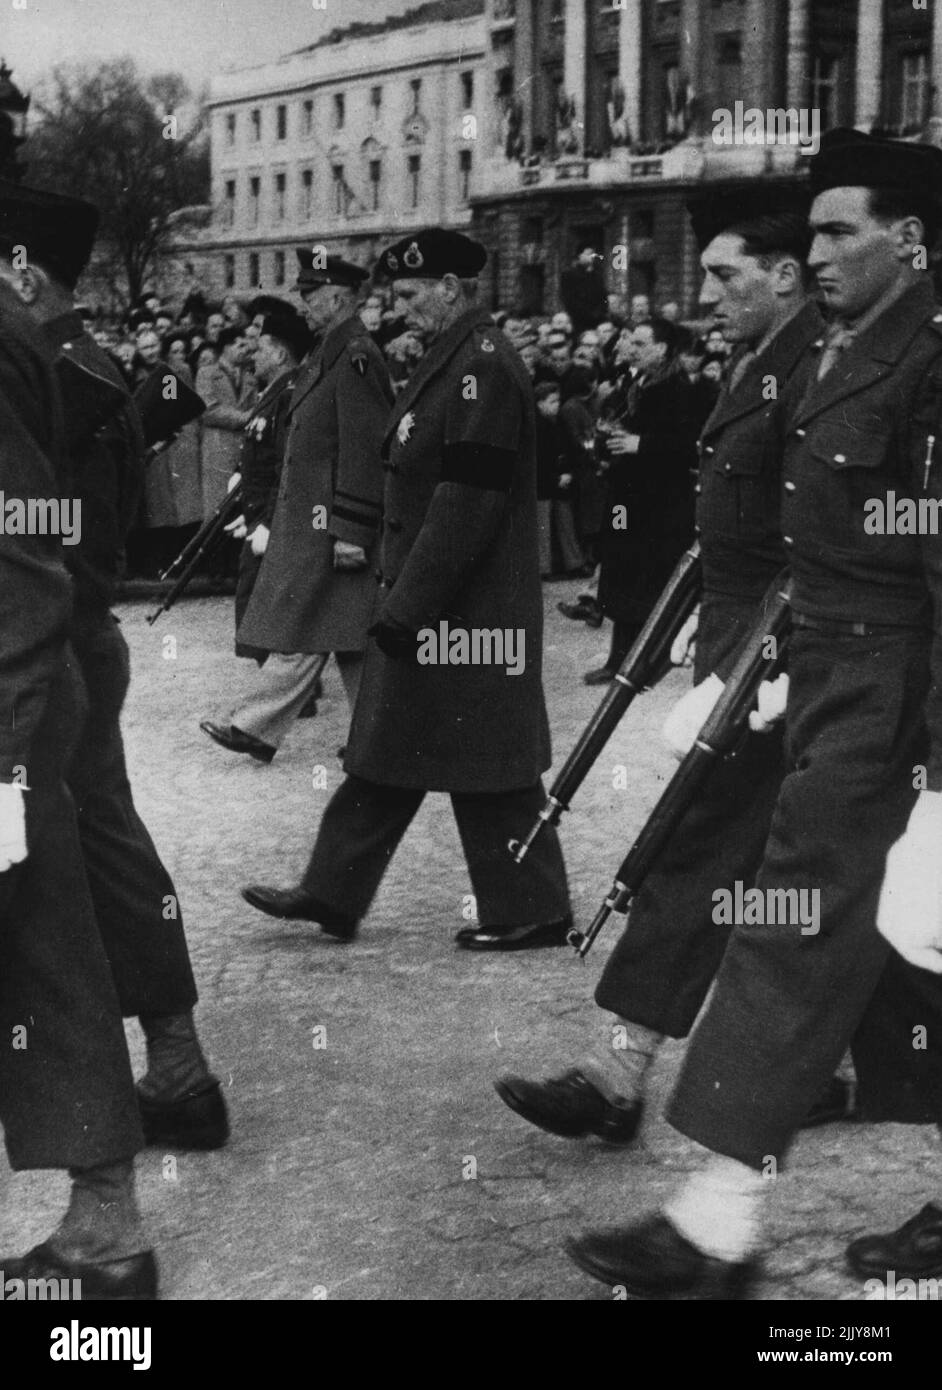 Funeral Of Marshal De Tassigny -- General Eisenhower (far side) and Field Marshall Lord Montgomery walking in procession during the funeral of Marshall de Latter de Tassigny in Paris yesterday. January 29, 1952. Stock Photo